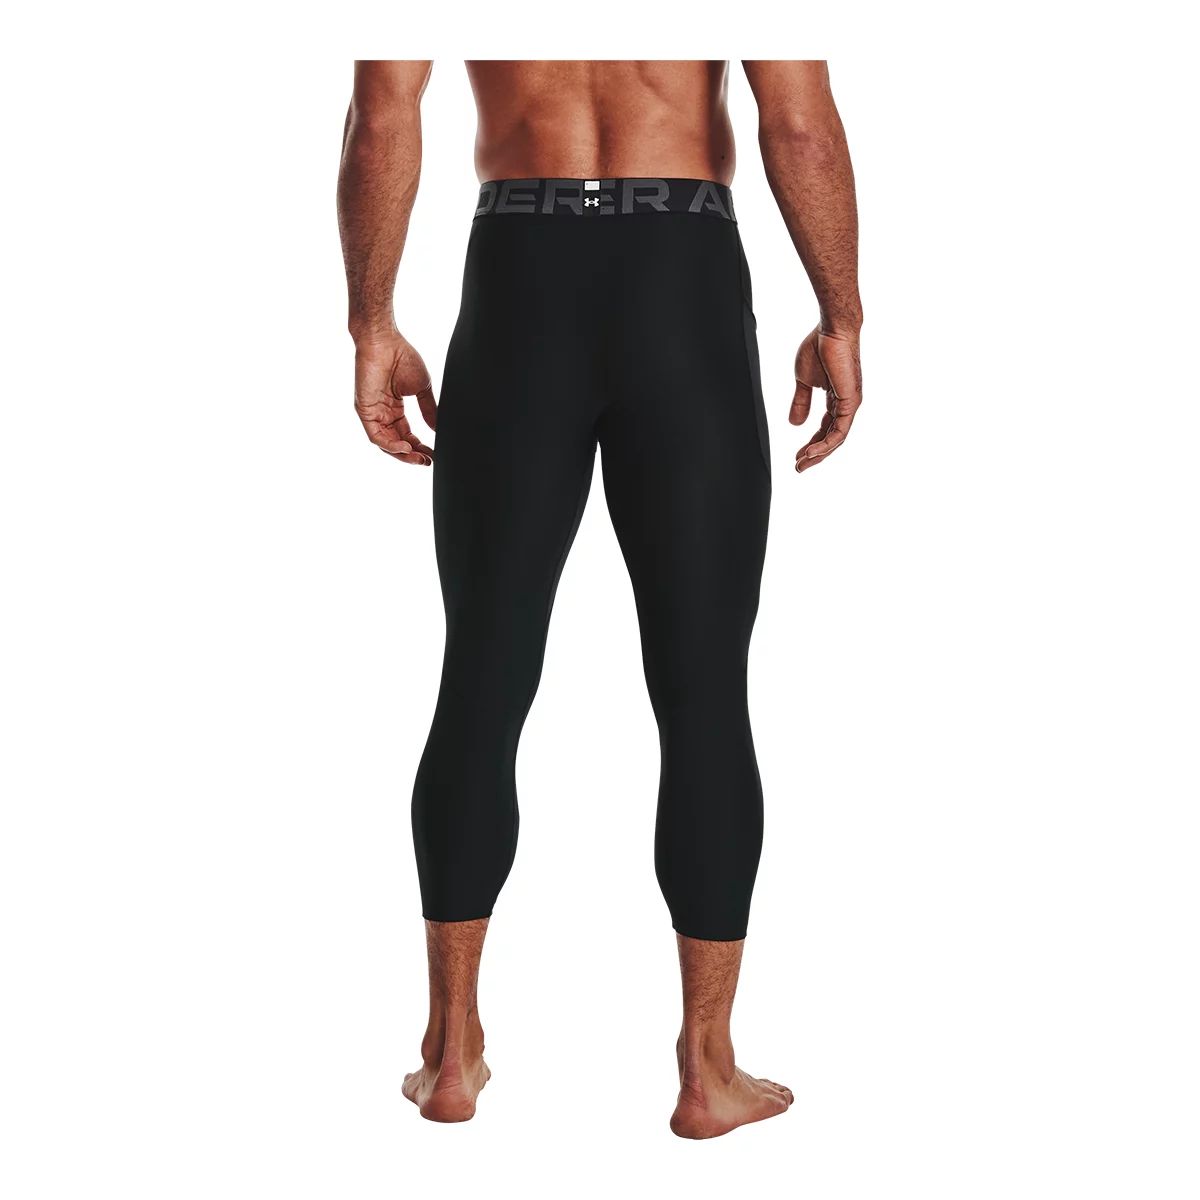 UNDER ARMOR Compression Leggings / Black & Gray Sporty-Look / Size